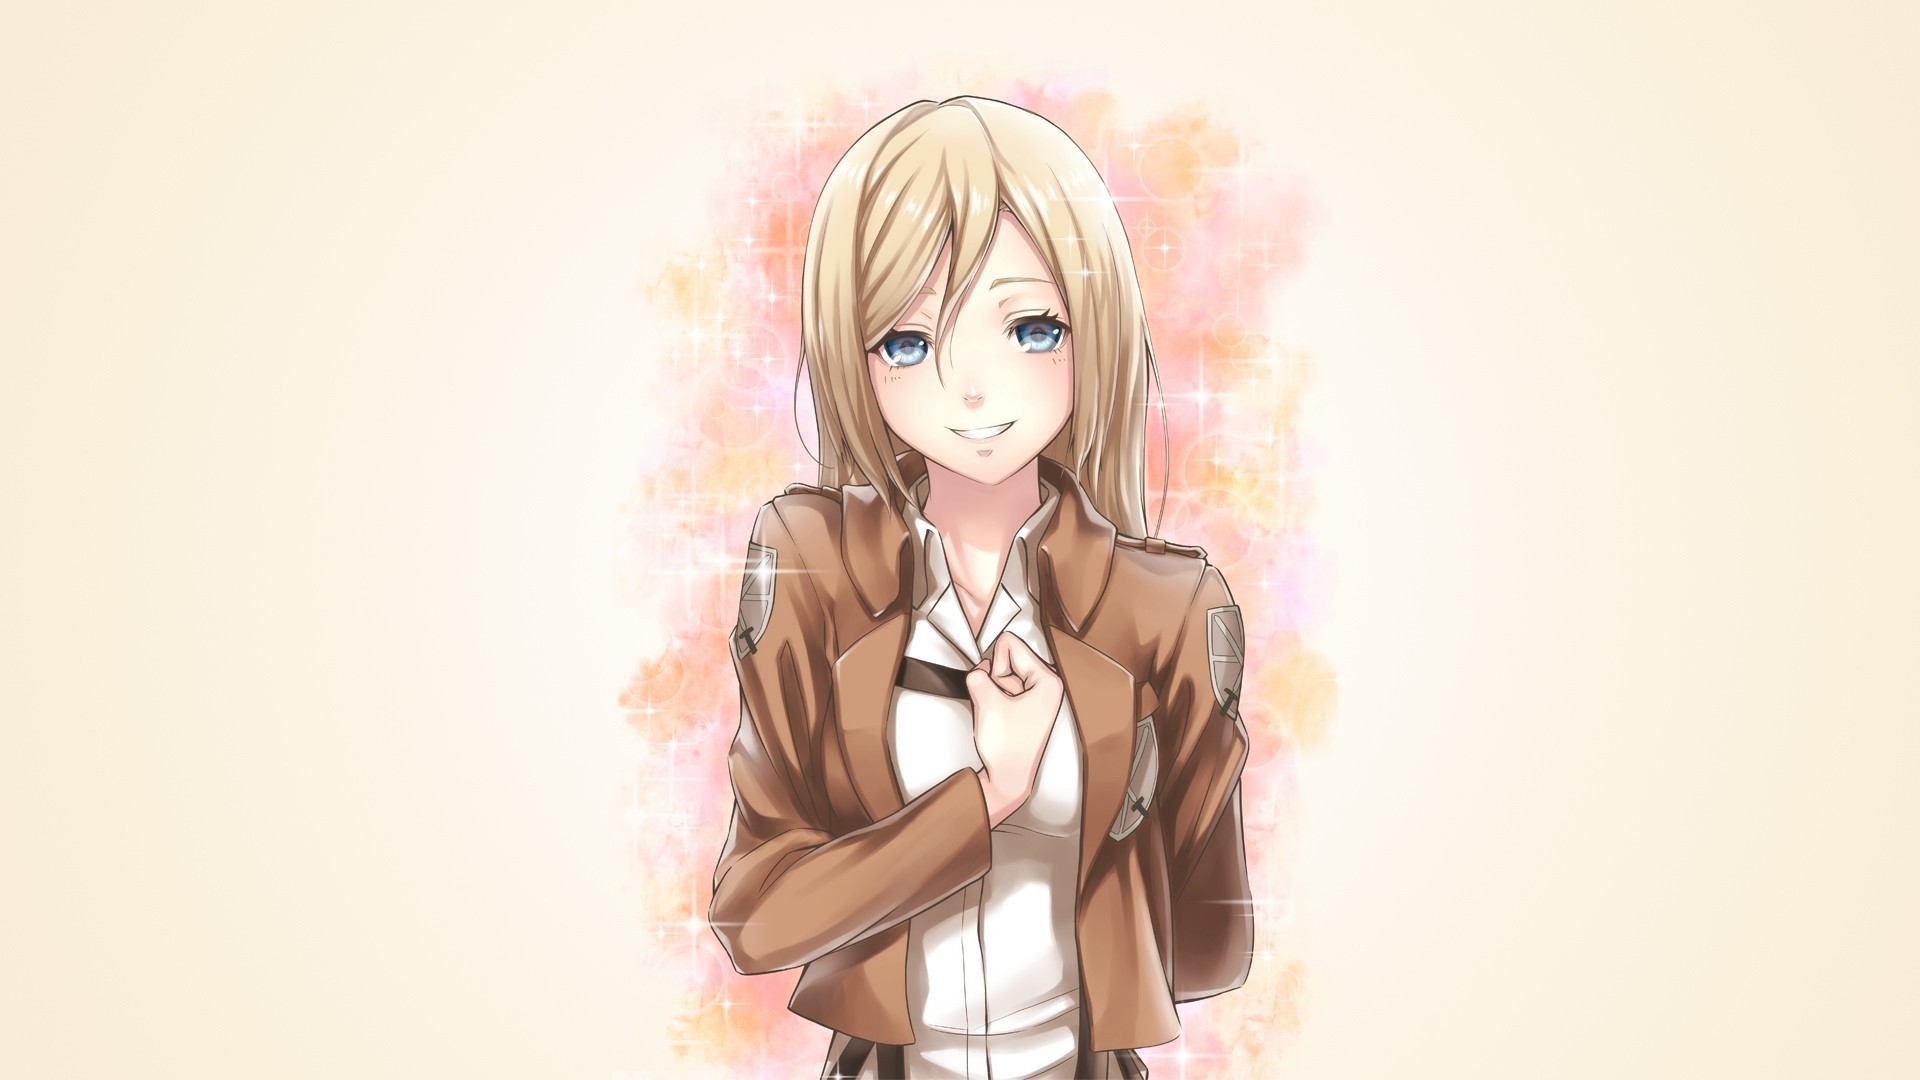 Anime girl in a jacket